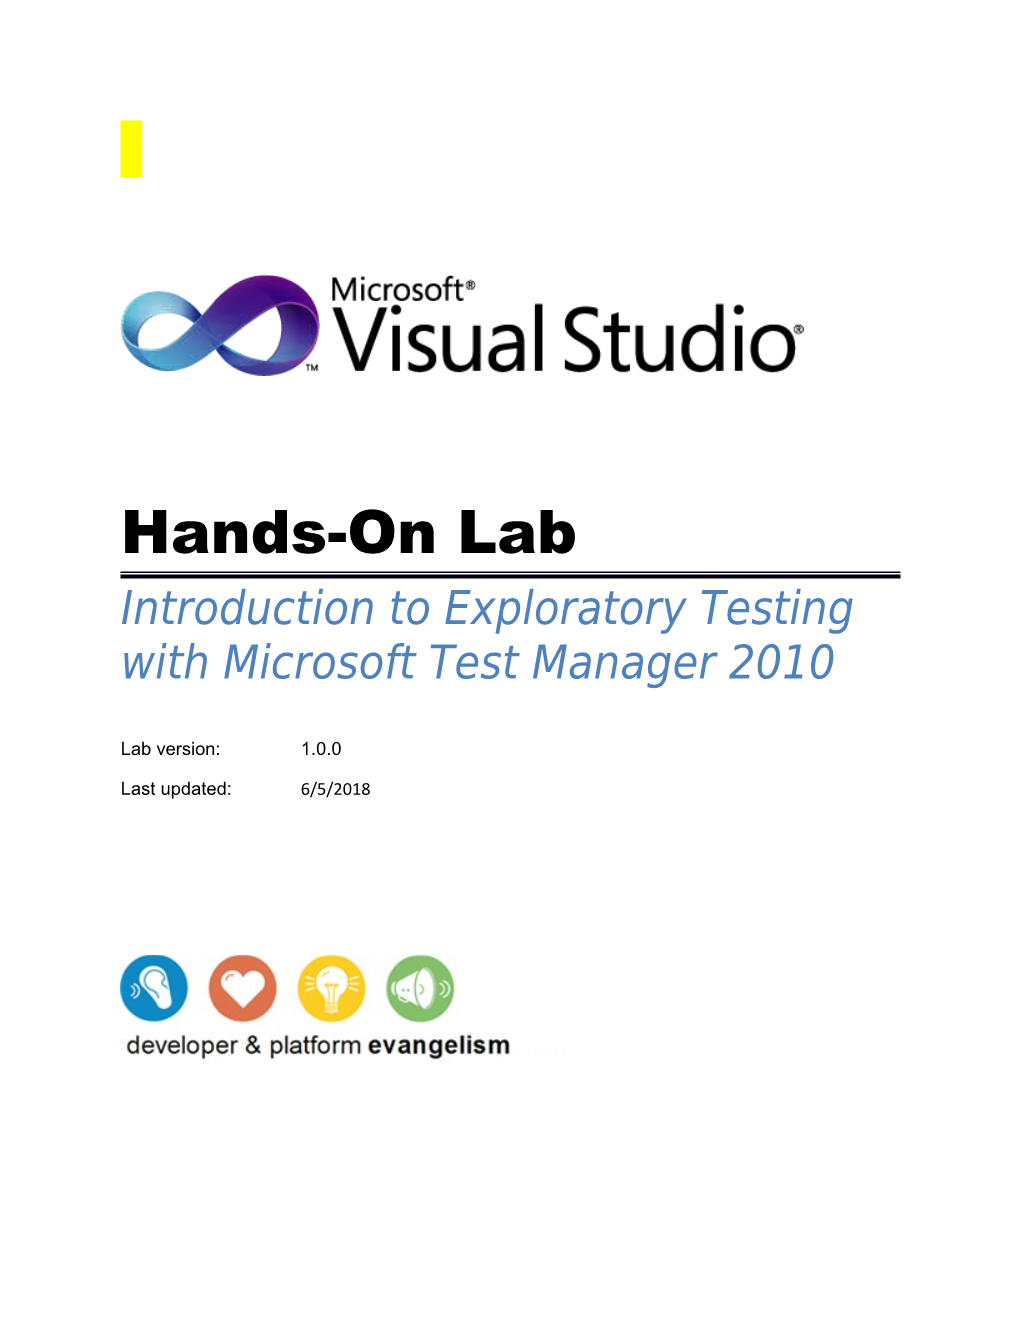 Introduction to Exploratory Testing with Microsoft Test Manager 2010